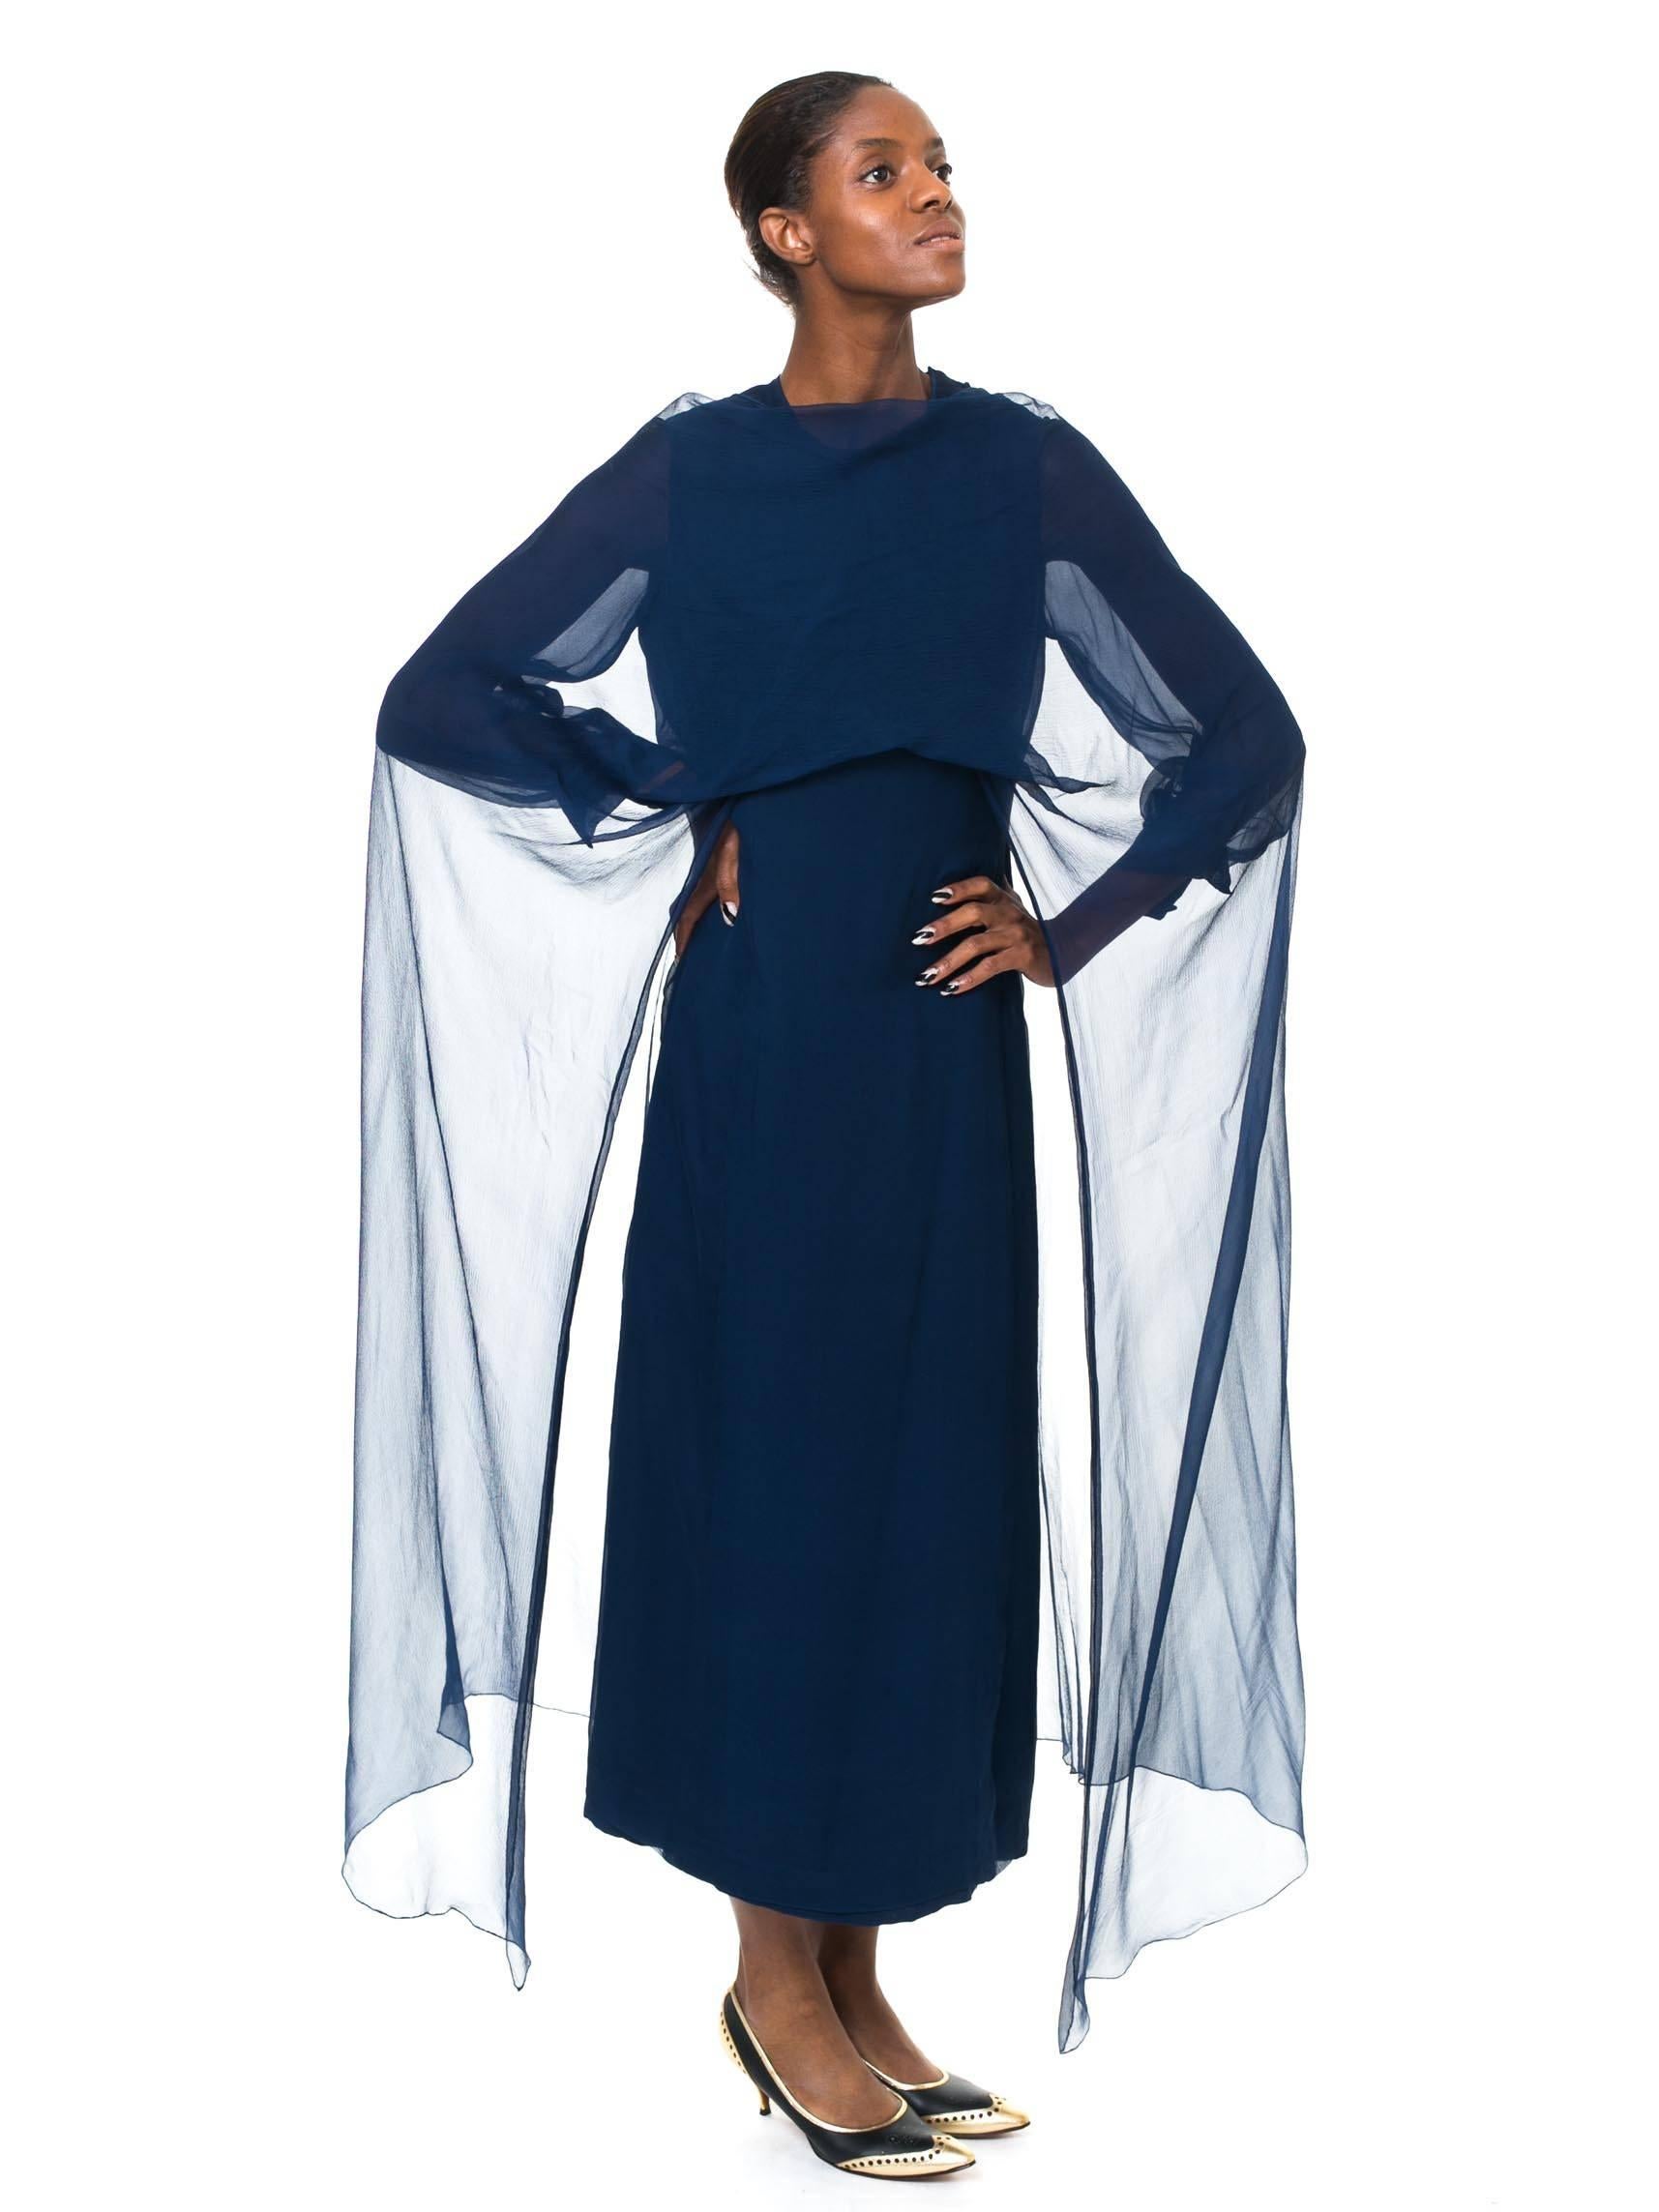 This is a midnight blue Balmain evening gown with full, cuffed sleeves and a wonderful detachable chiffon mantle, which extends in a full cape down the sides. The cut of the dress is a simple and elegant column cut, giving the impression of height